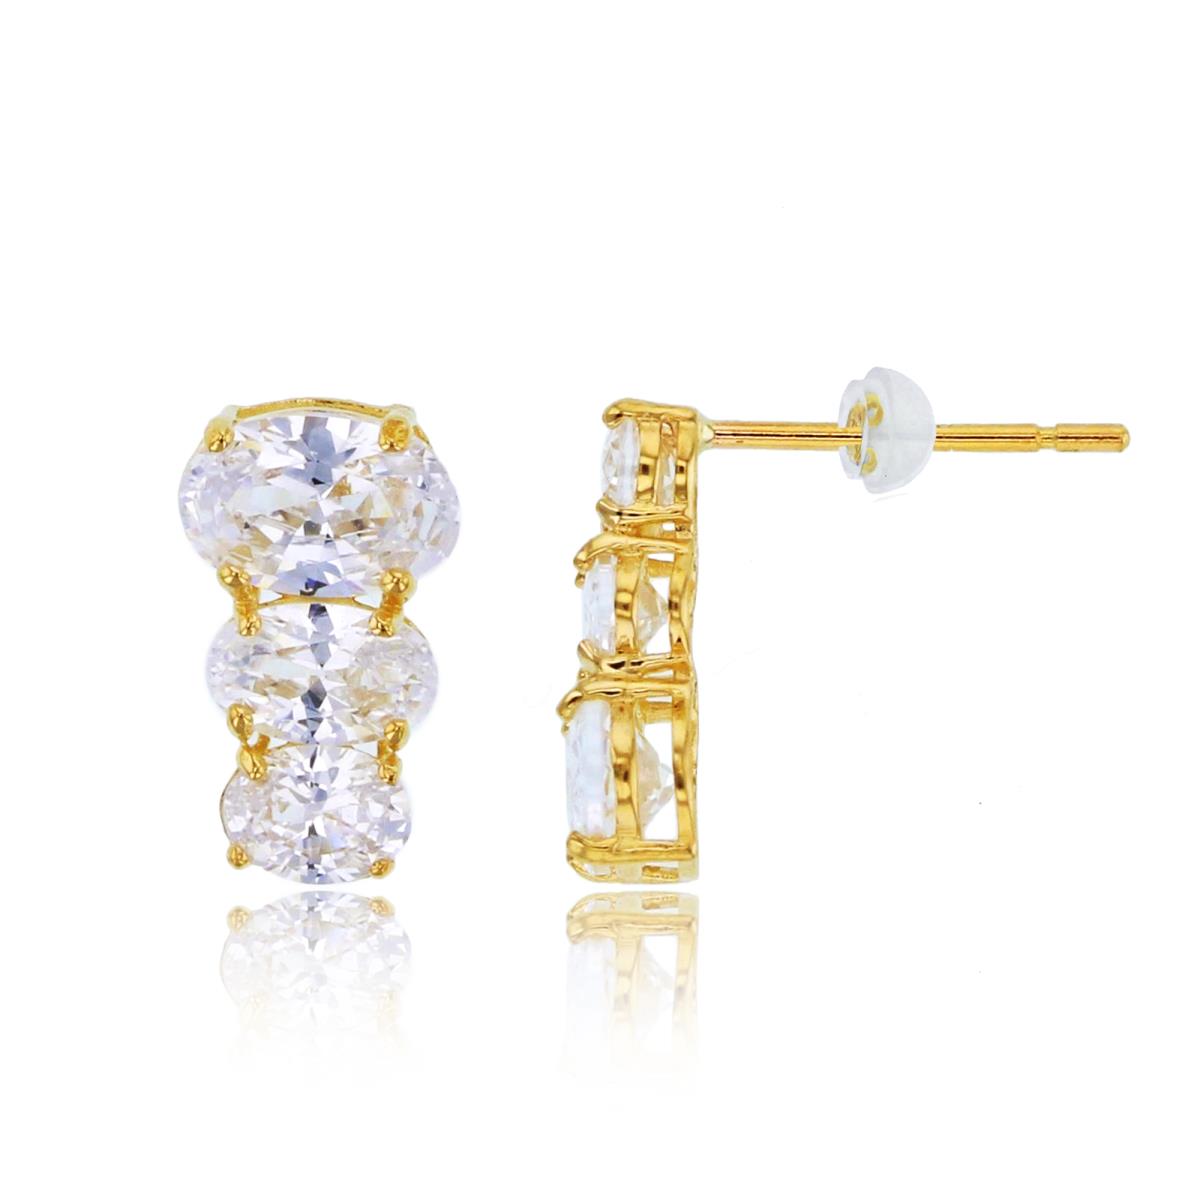 10K Yellow Gold Graduated 4x3/5x3/6x4mm Oval CZ Studs with Silicon Backs